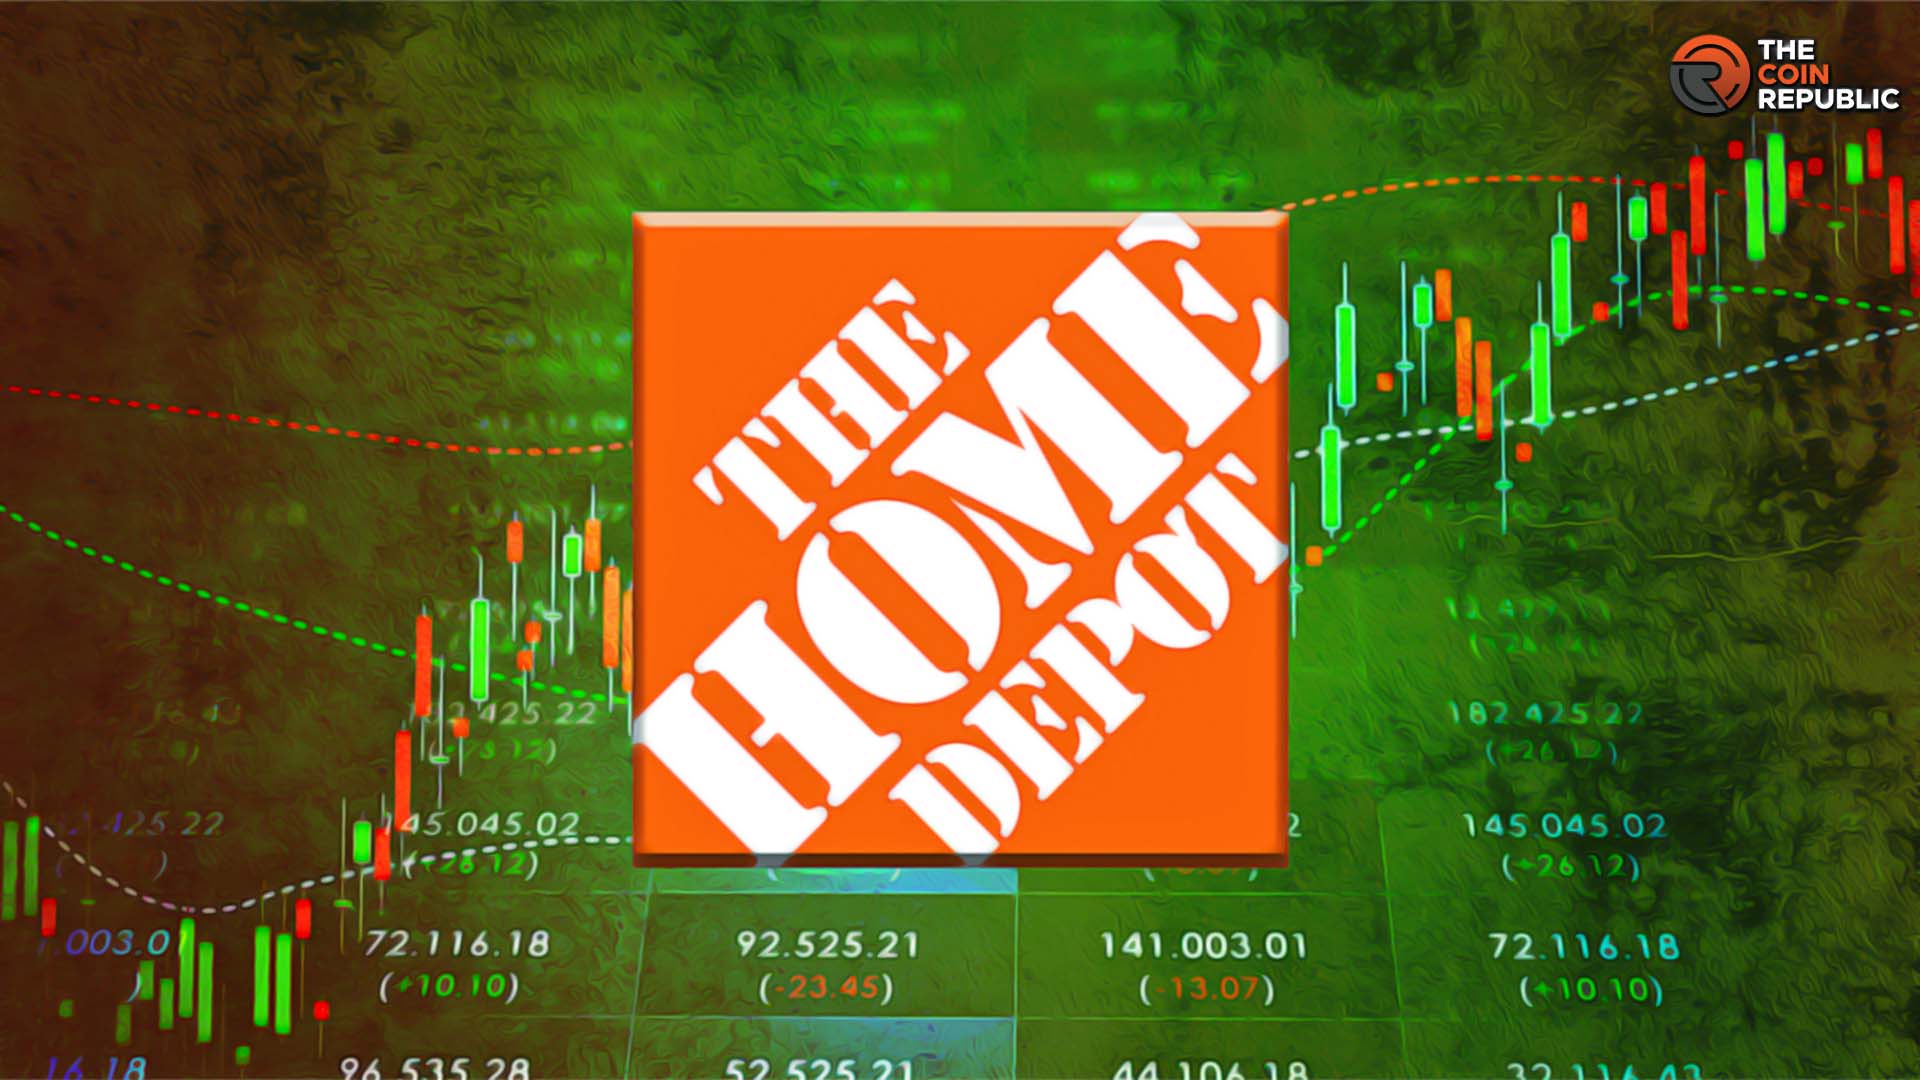 HD Stock (NYSE: HD) Delivers Selloff, Will Bulls Hold $275?